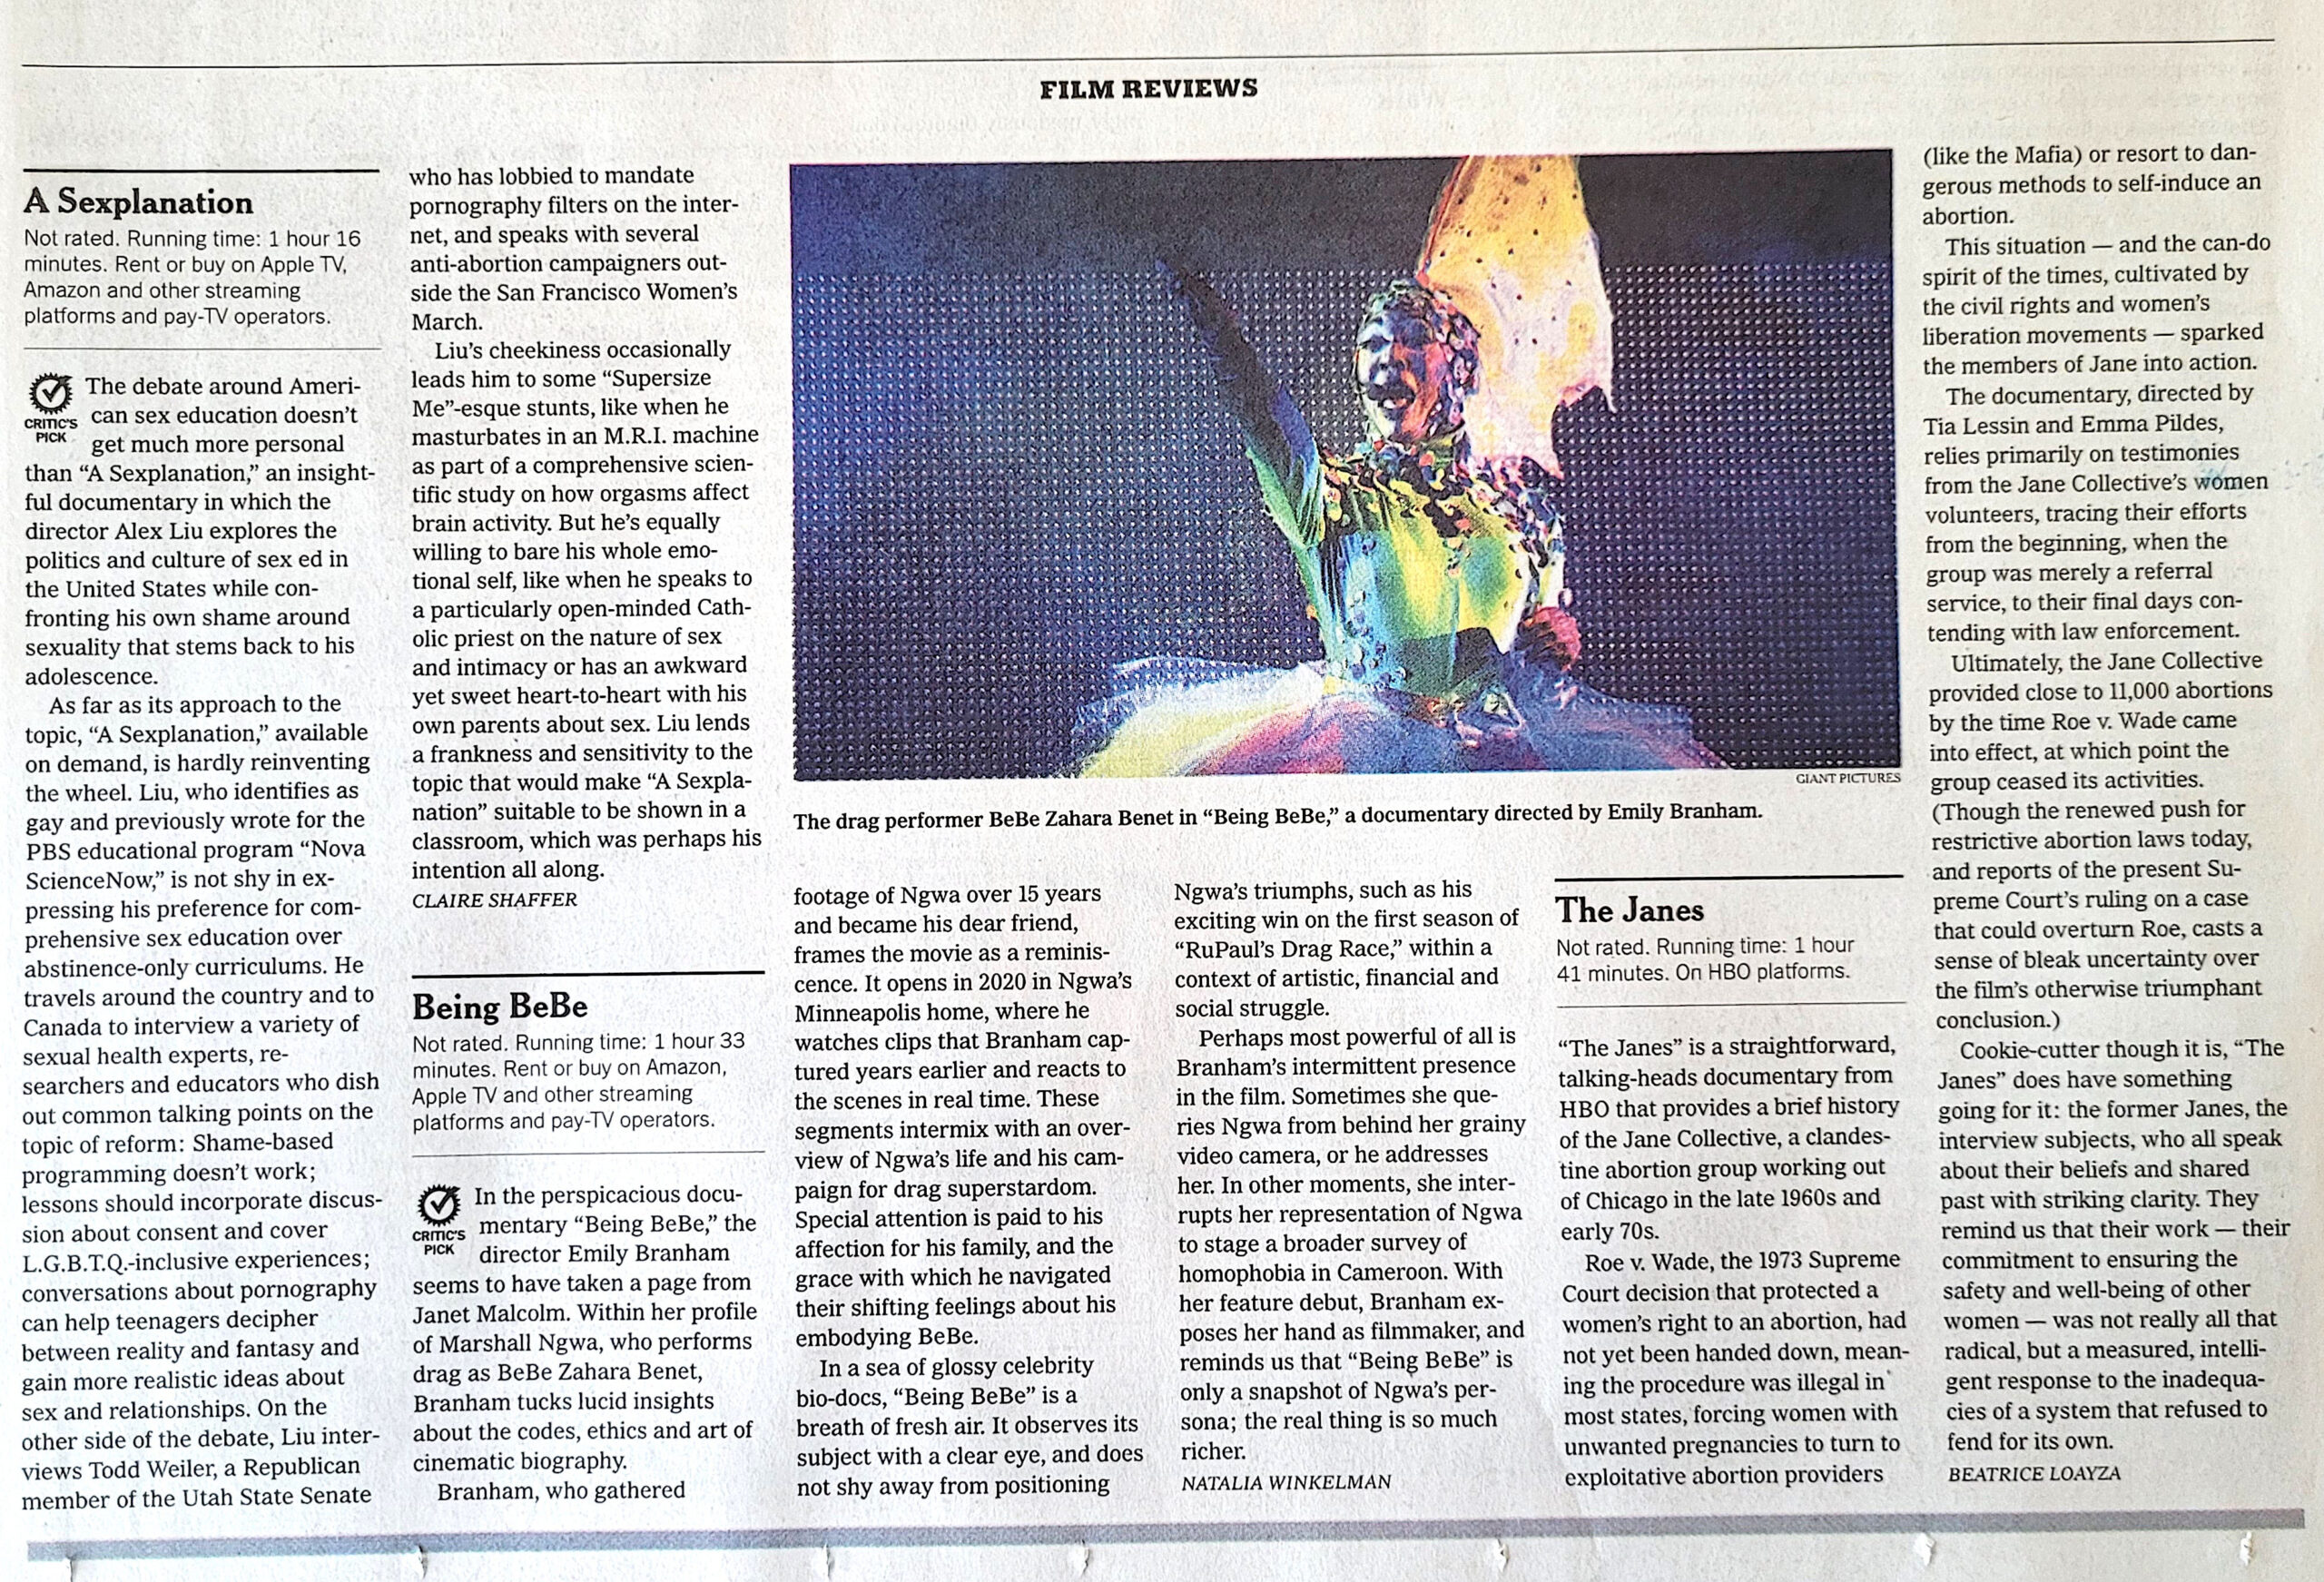 Being Bebe in New York Times